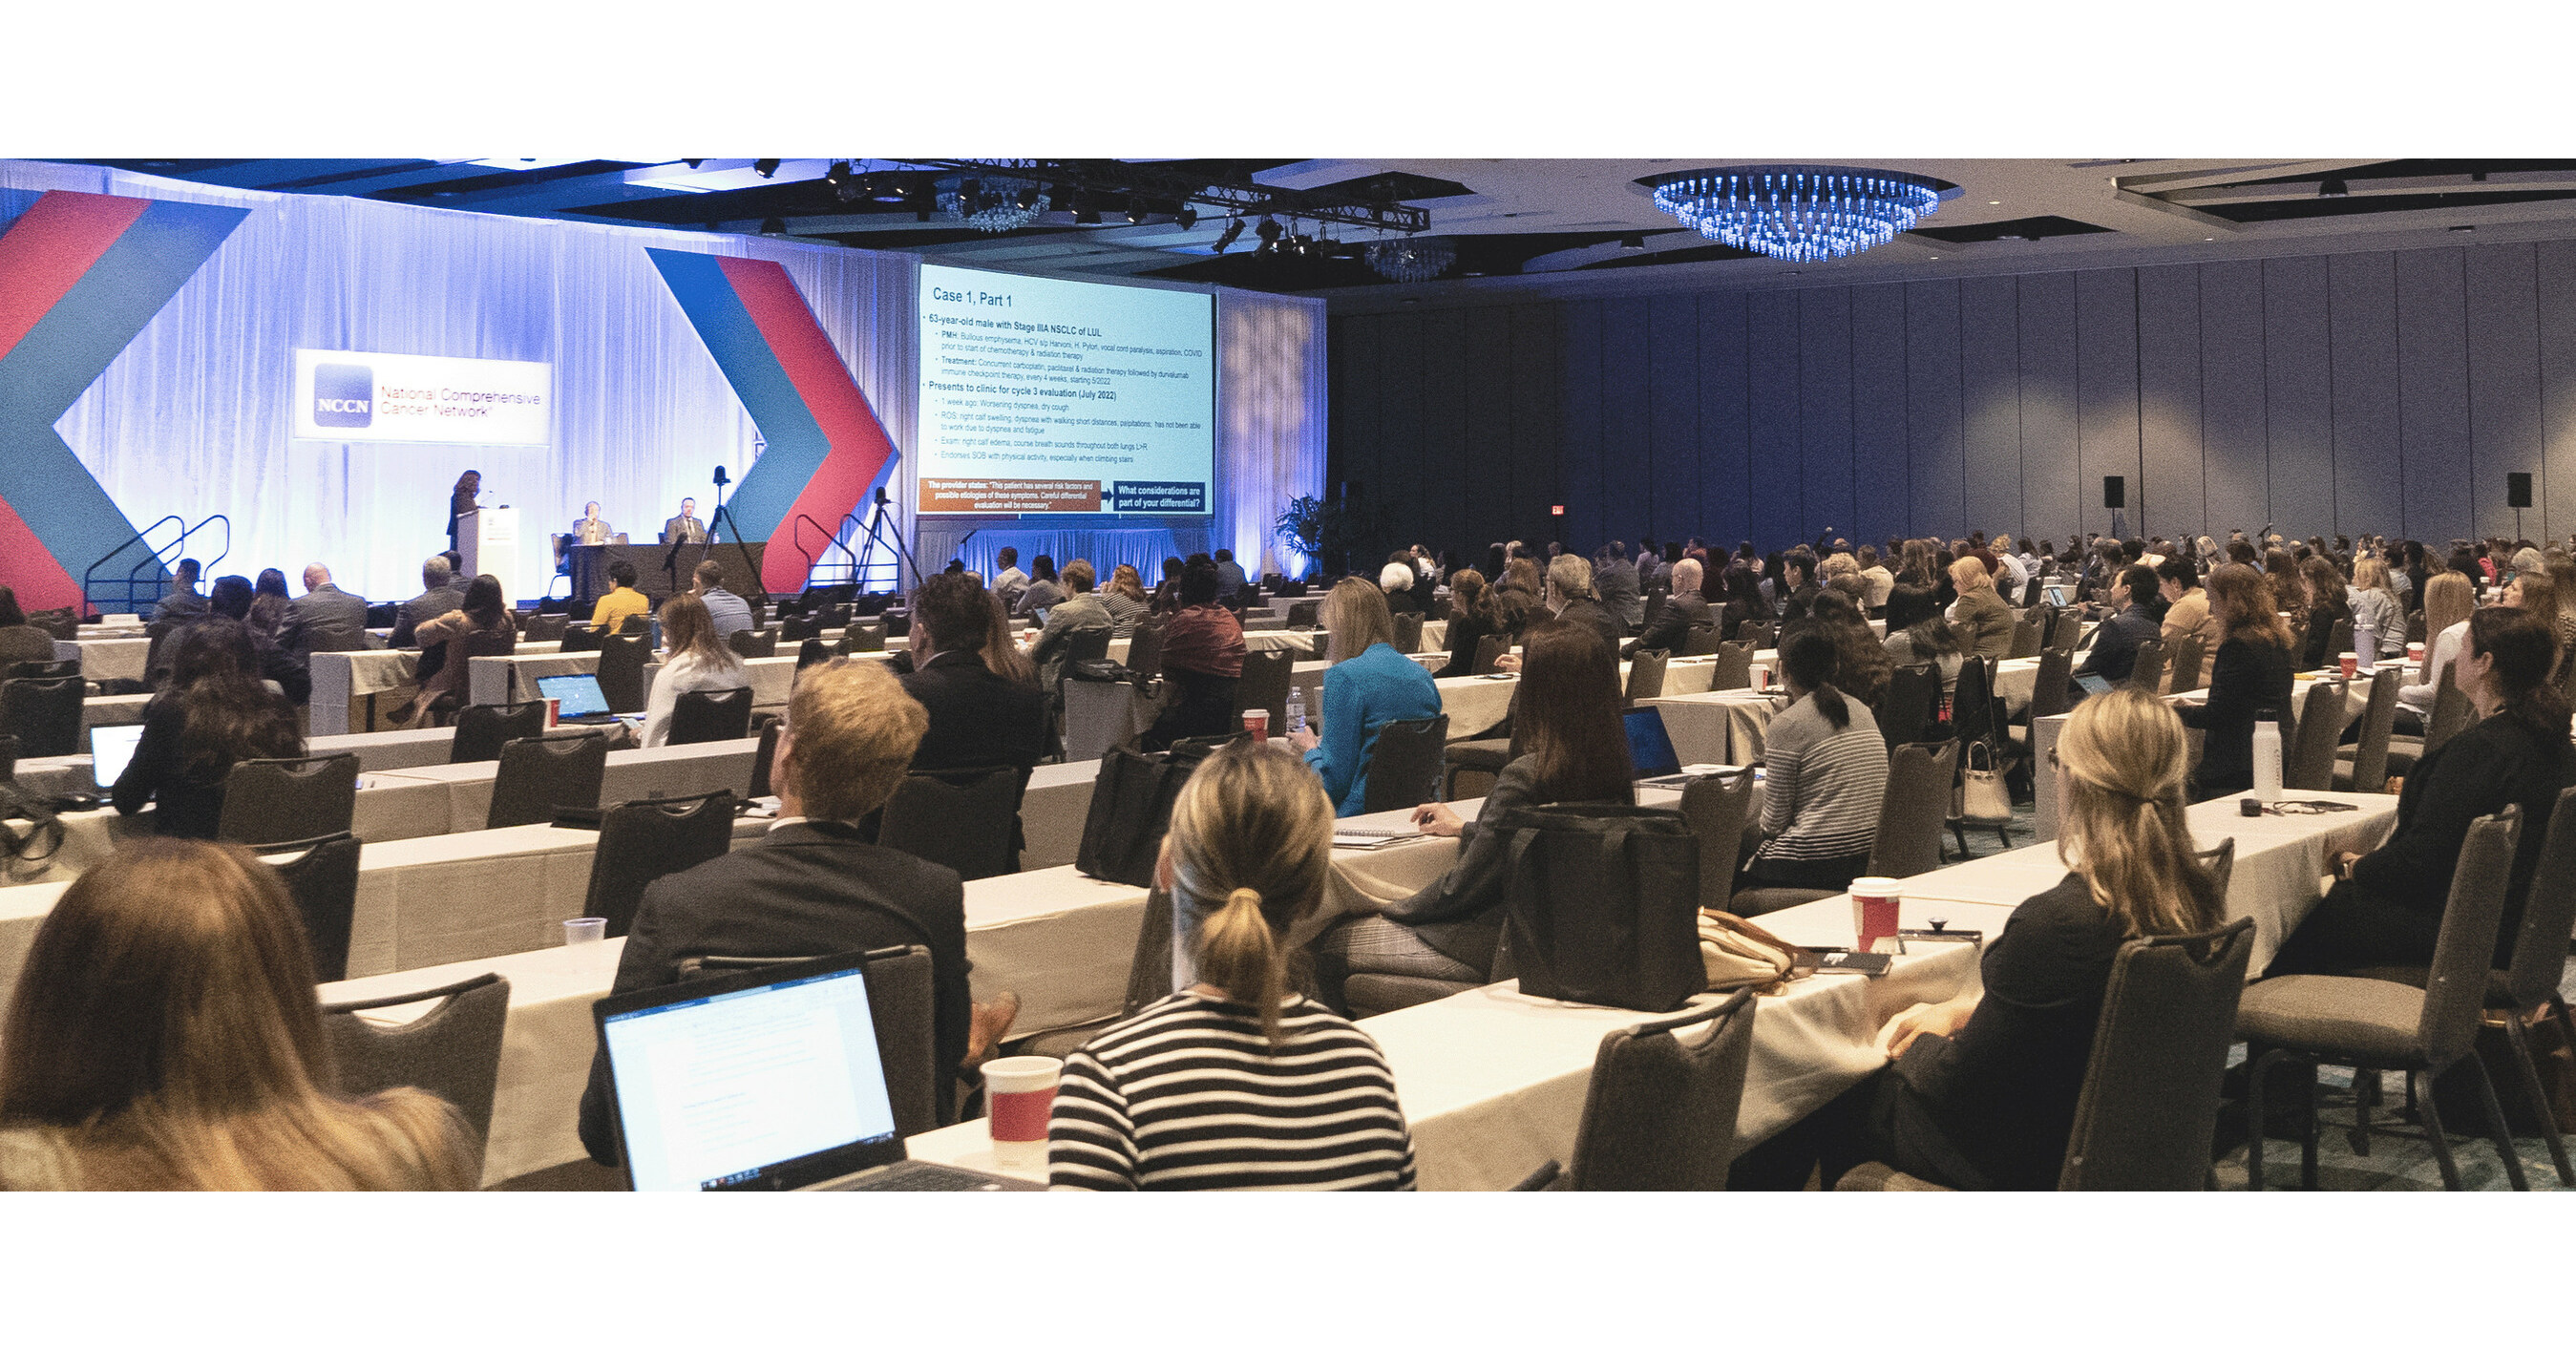 NCCN Annual Conference Brings Up Important Questions for Improving